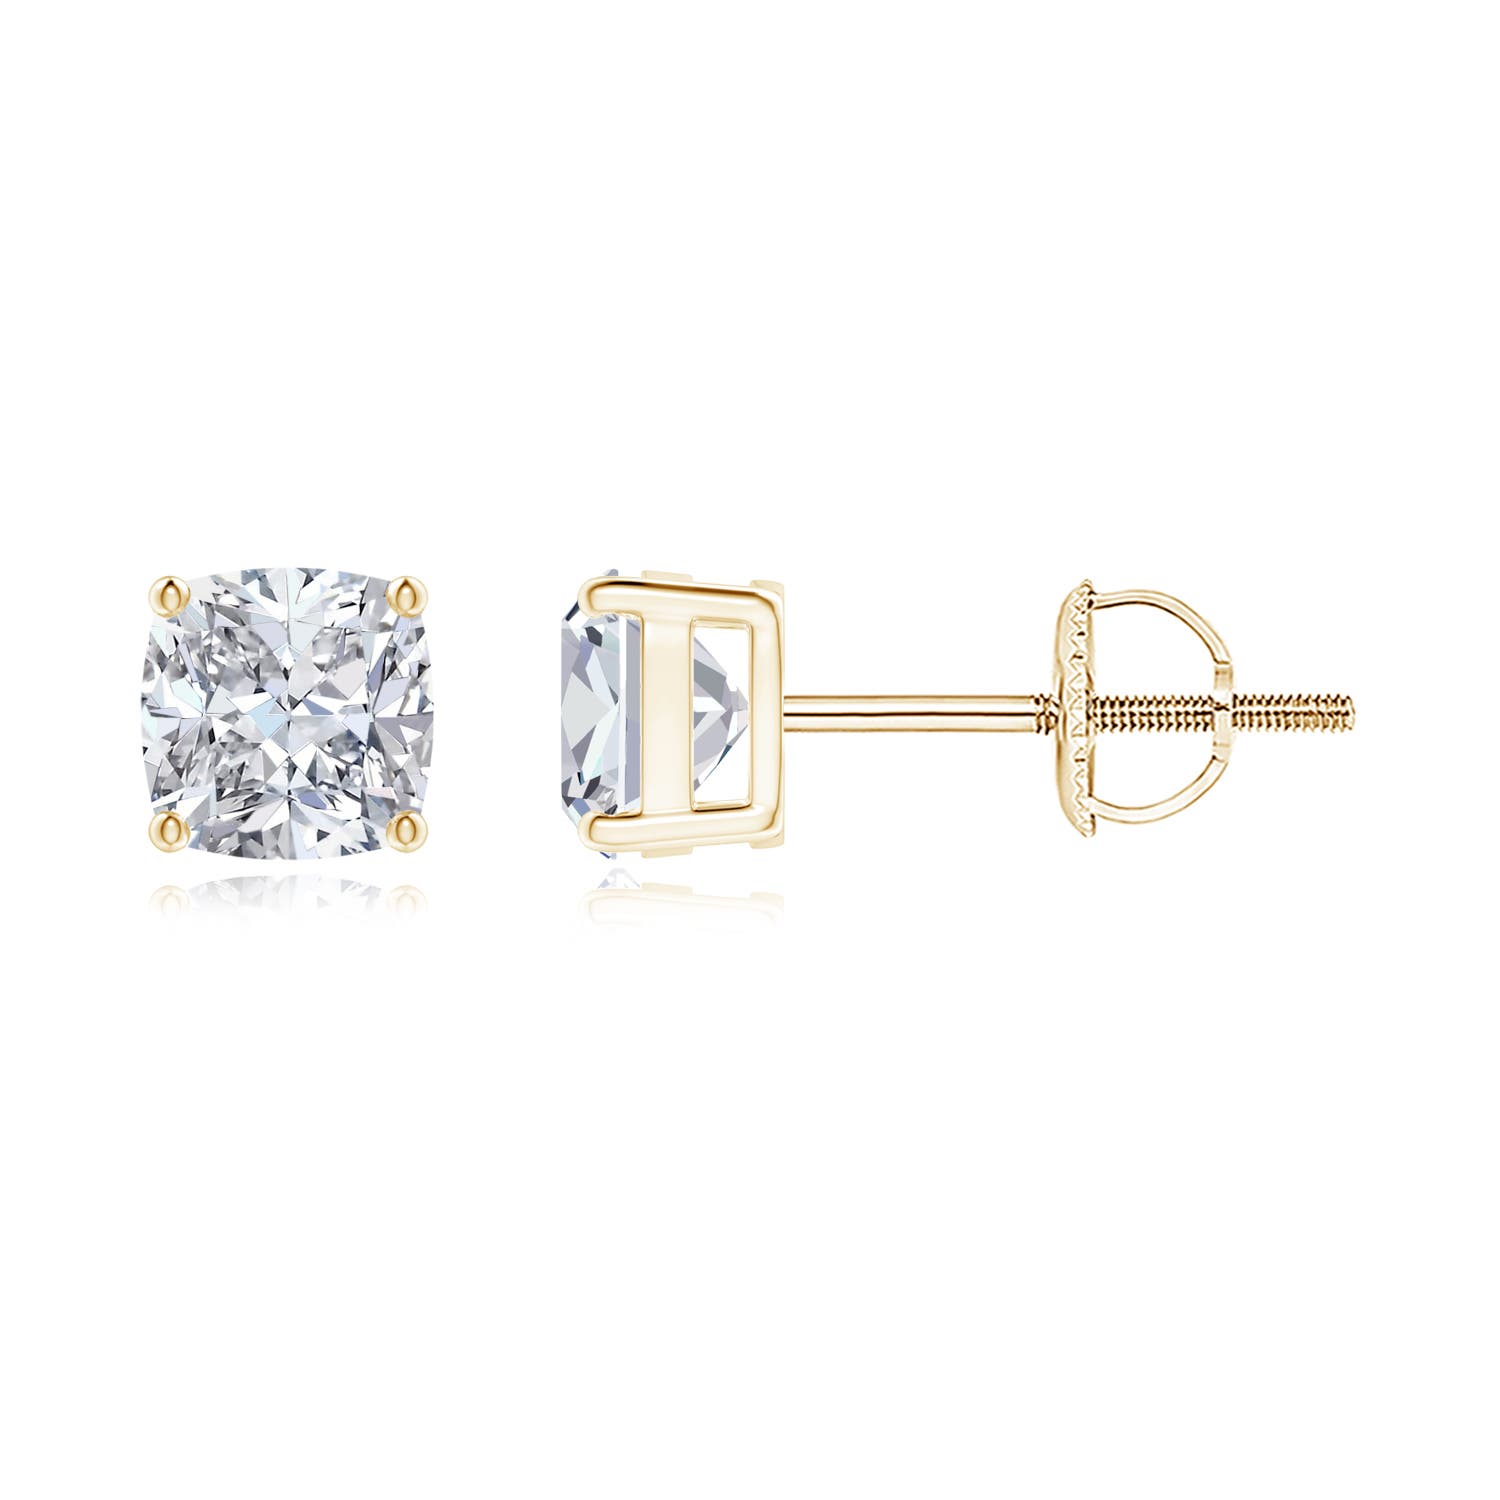 H, SI2 / 0.72 CT / 14 KT Yellow Gold